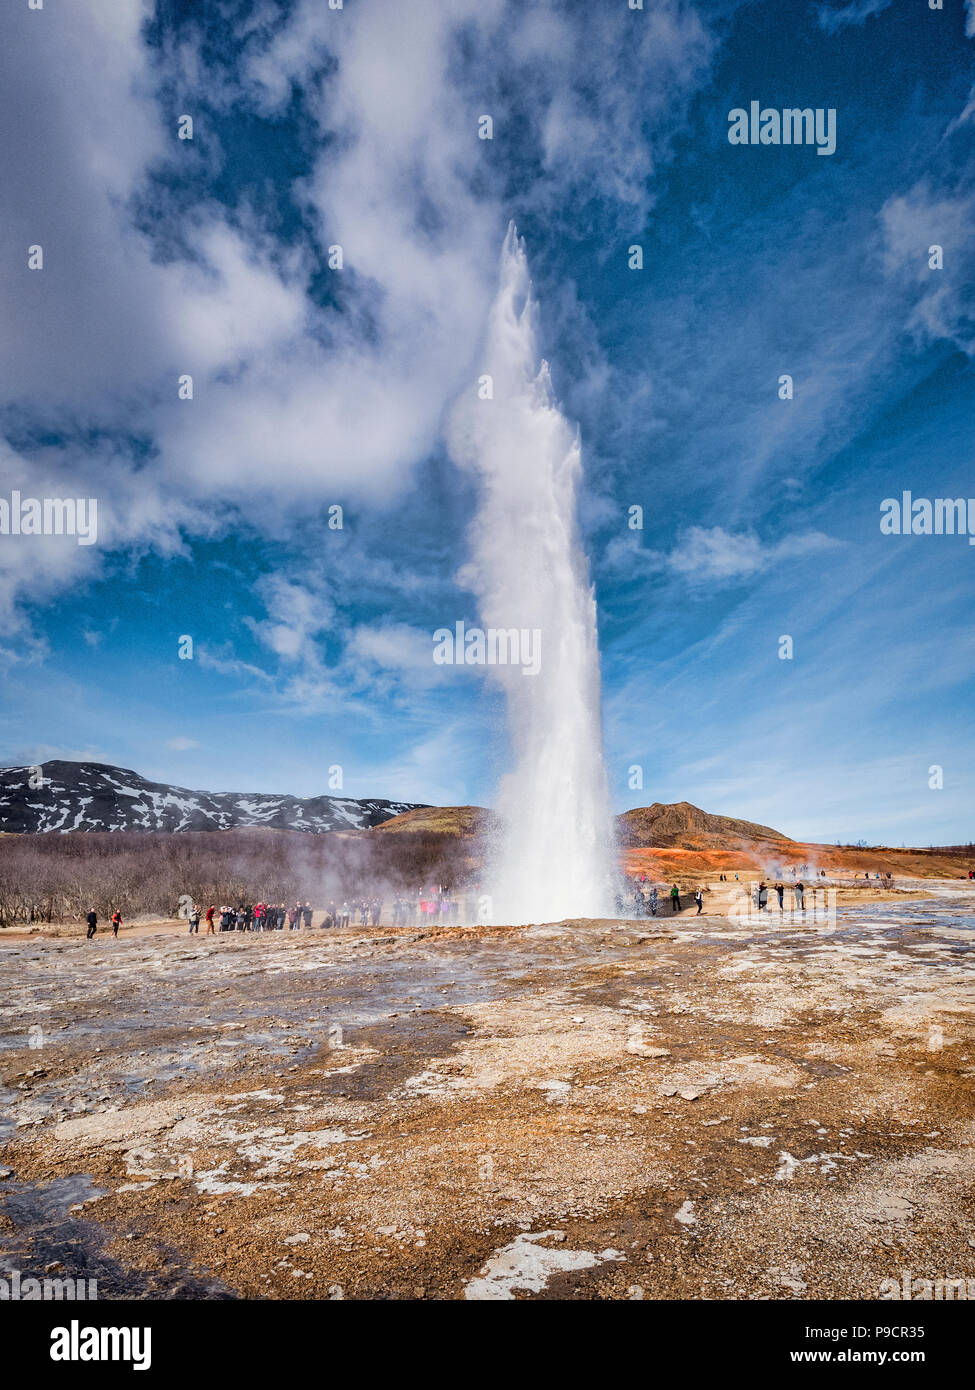 20 April 2018: Geysir, Iceland - Strokkur hot spring in the Geysir geothermal area erupts, watched by a crowd of visitors. This is one of the major at Stock Photo